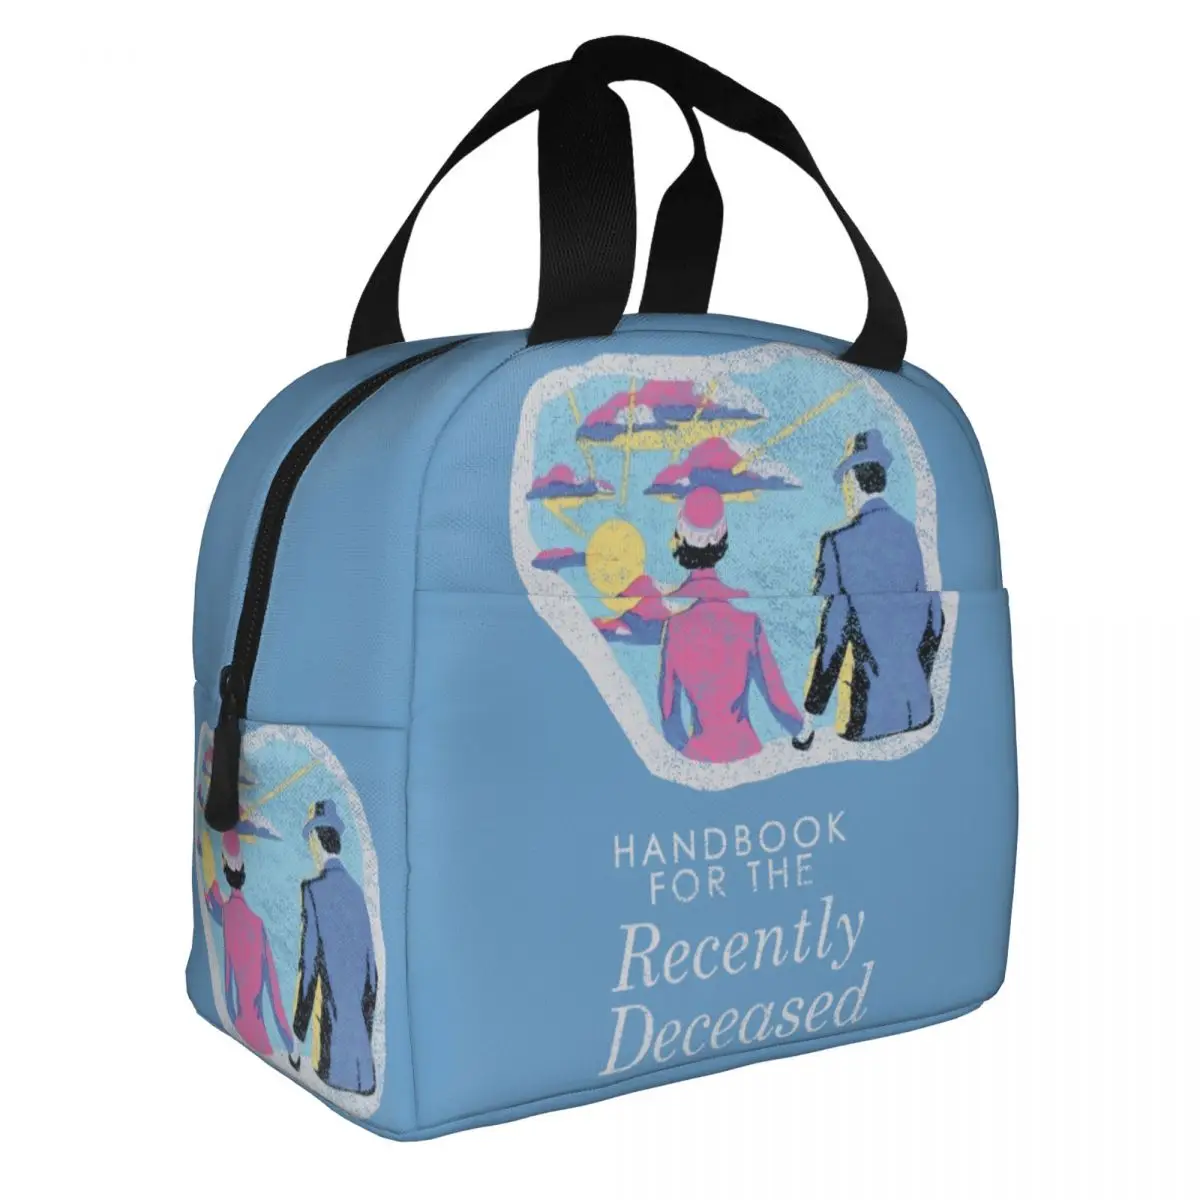 

Handbook For The Recently Deceased Insulated Lunch Bag Lunch Container Beetlejuice Horror Movie Tote Lunch Box Food Storage Bags